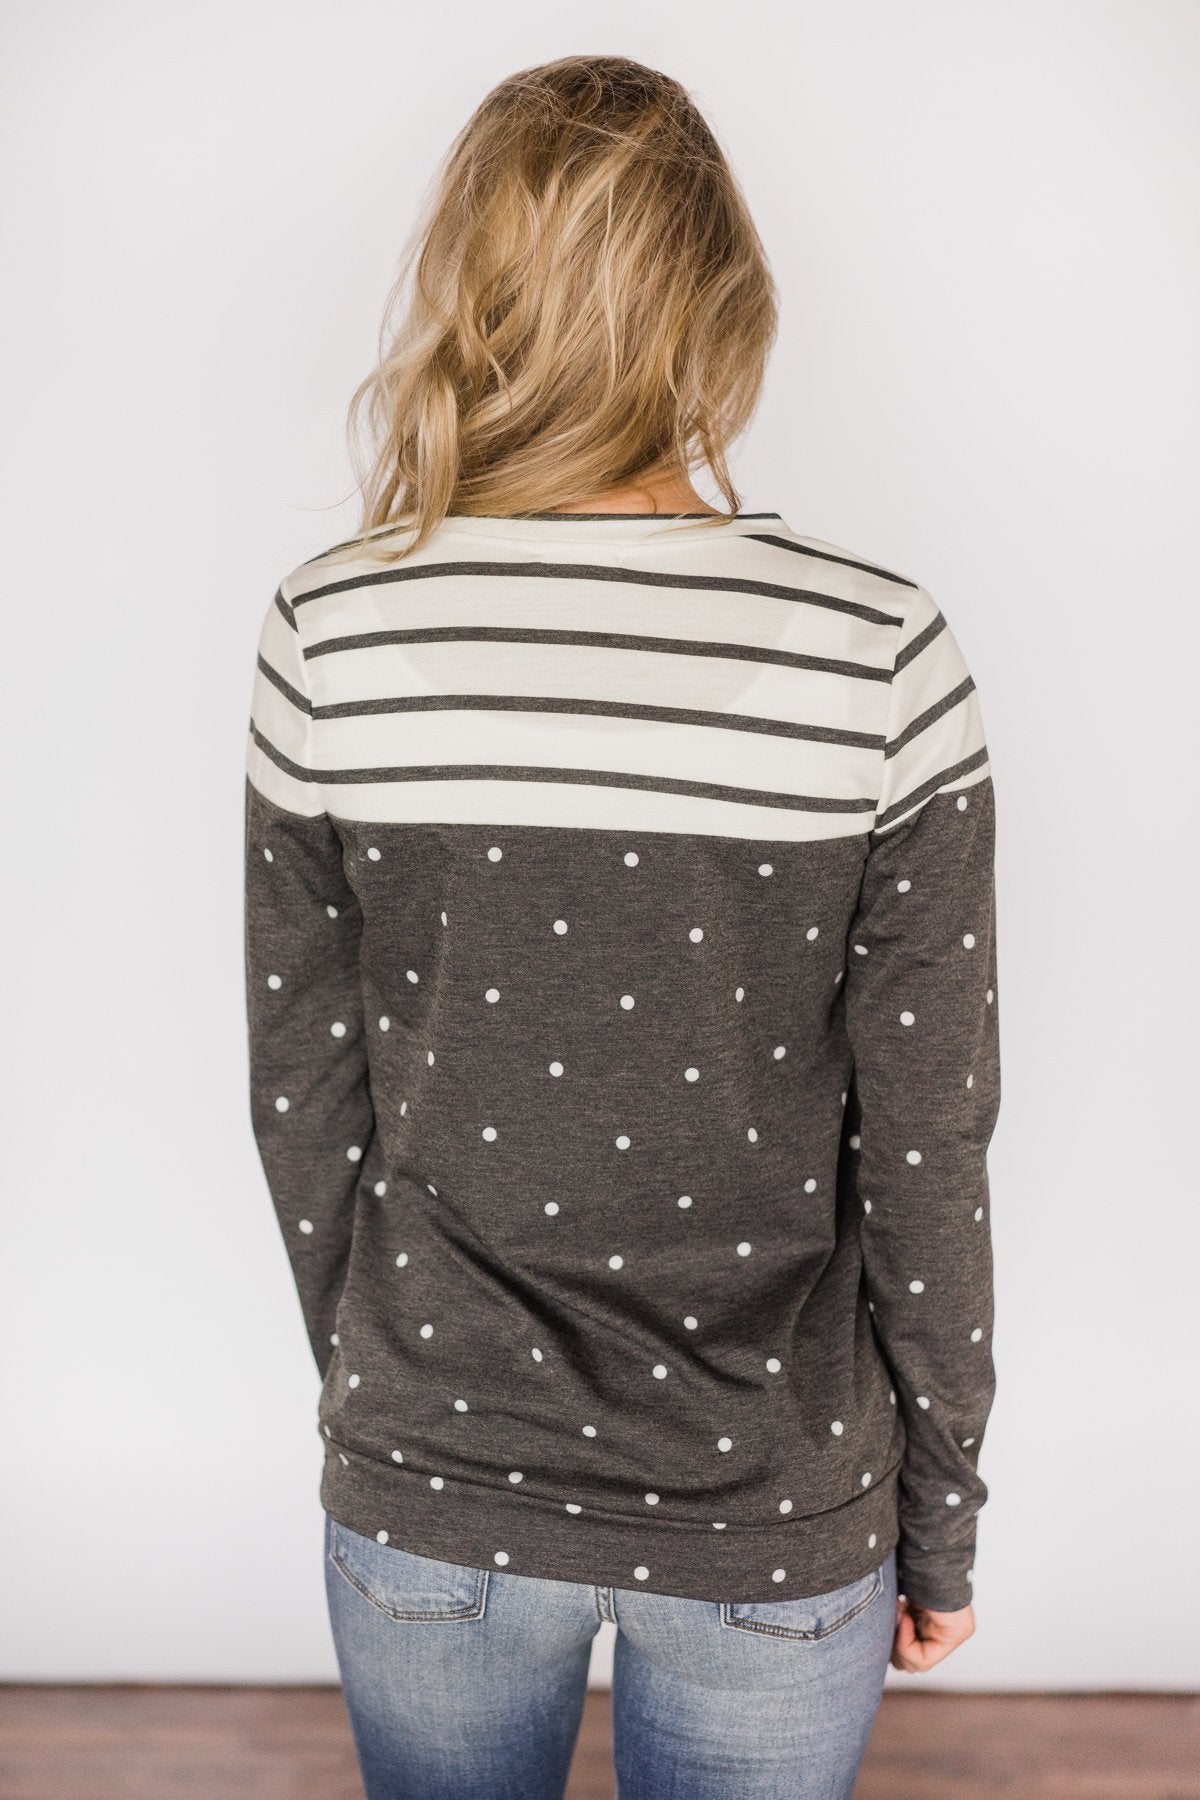 Welcome to the Party~Charcoal Polka Dot & Stripes Top